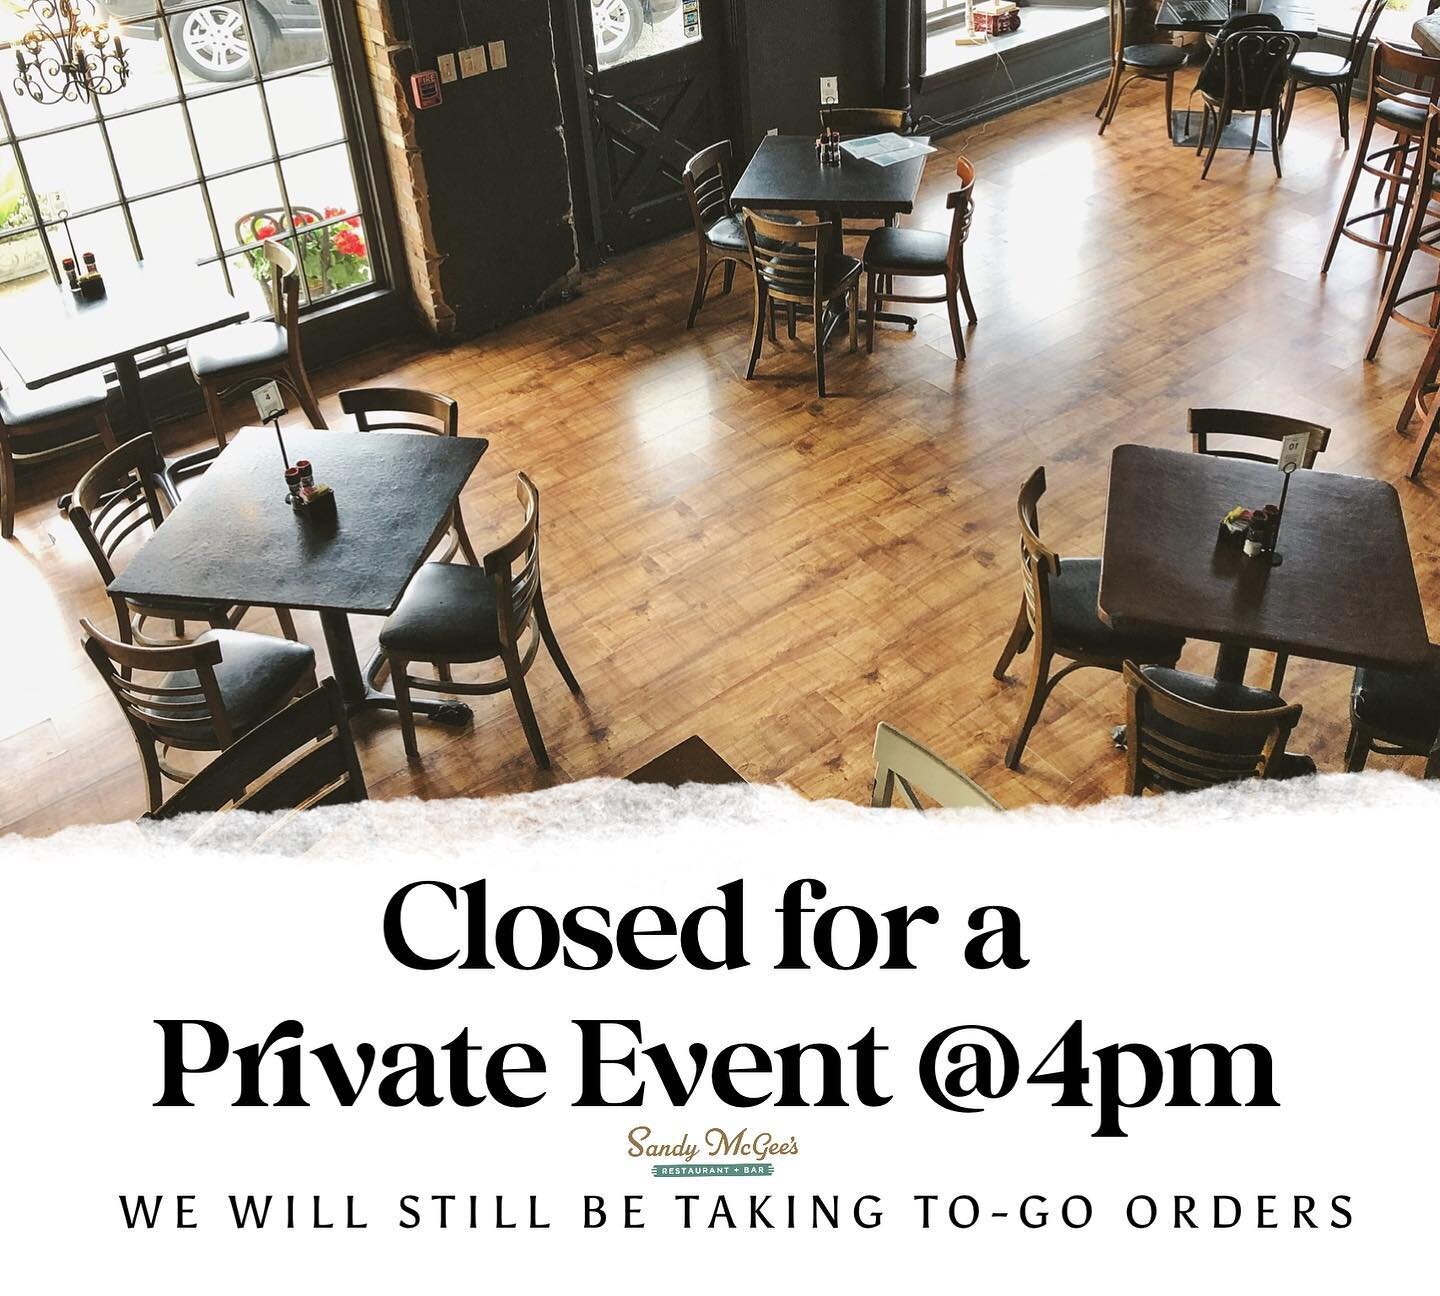 Sandy McGee&rsquo;s will be closing at 4pm - Friday, January 6th - for a private event. We will still be taking to-go orders all night.

www.SandyMcGees.com // (281)344-9393

See you for Lunch!!